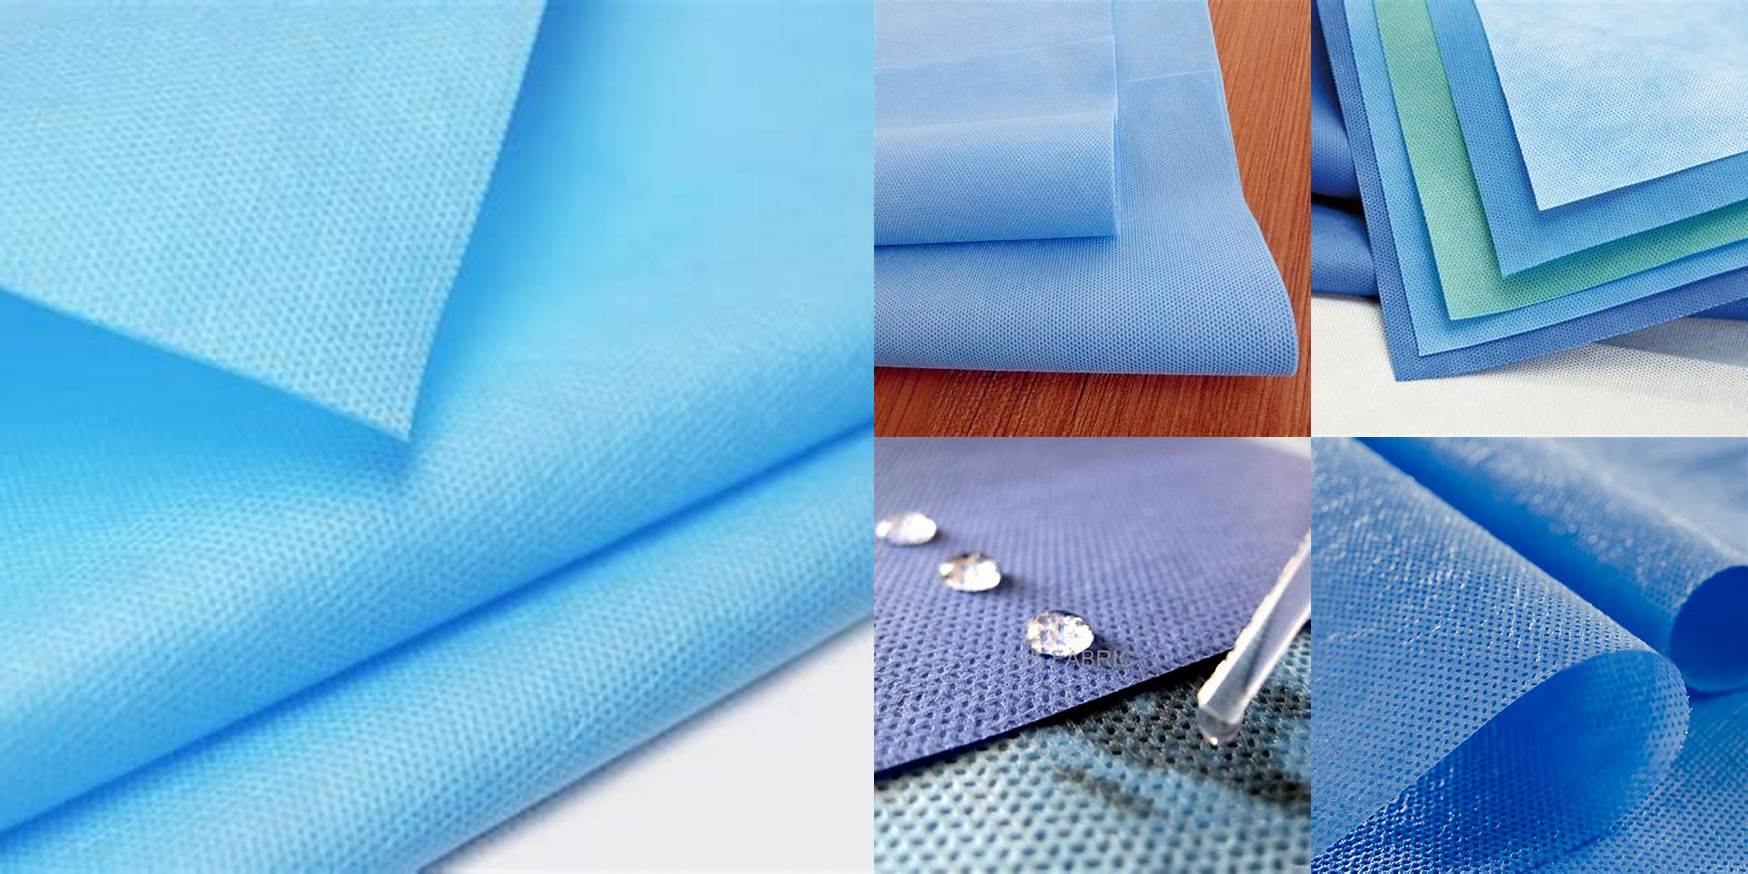 What Is Sms Fabric